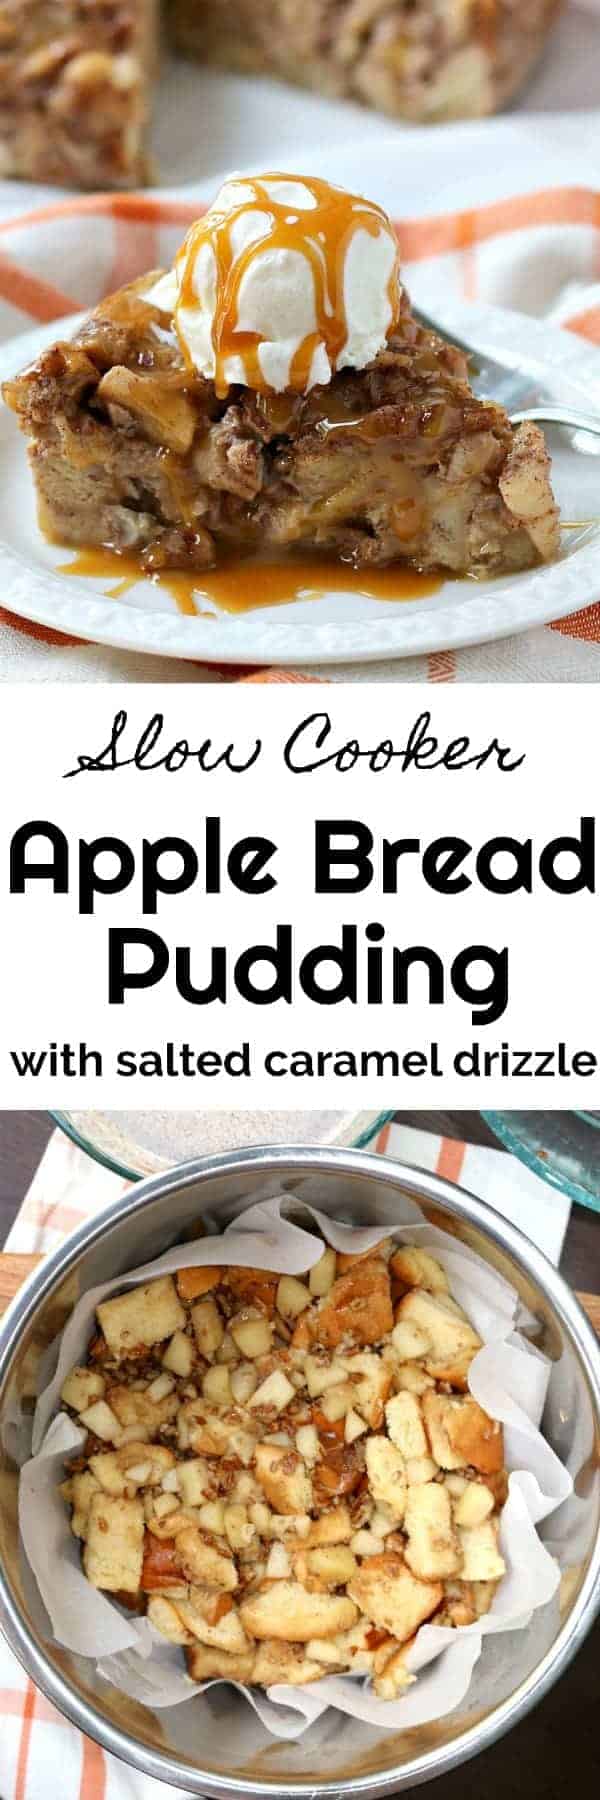 Super simple Slow Cooker Apple Bread Pudding with Salted Caramel Drizzle